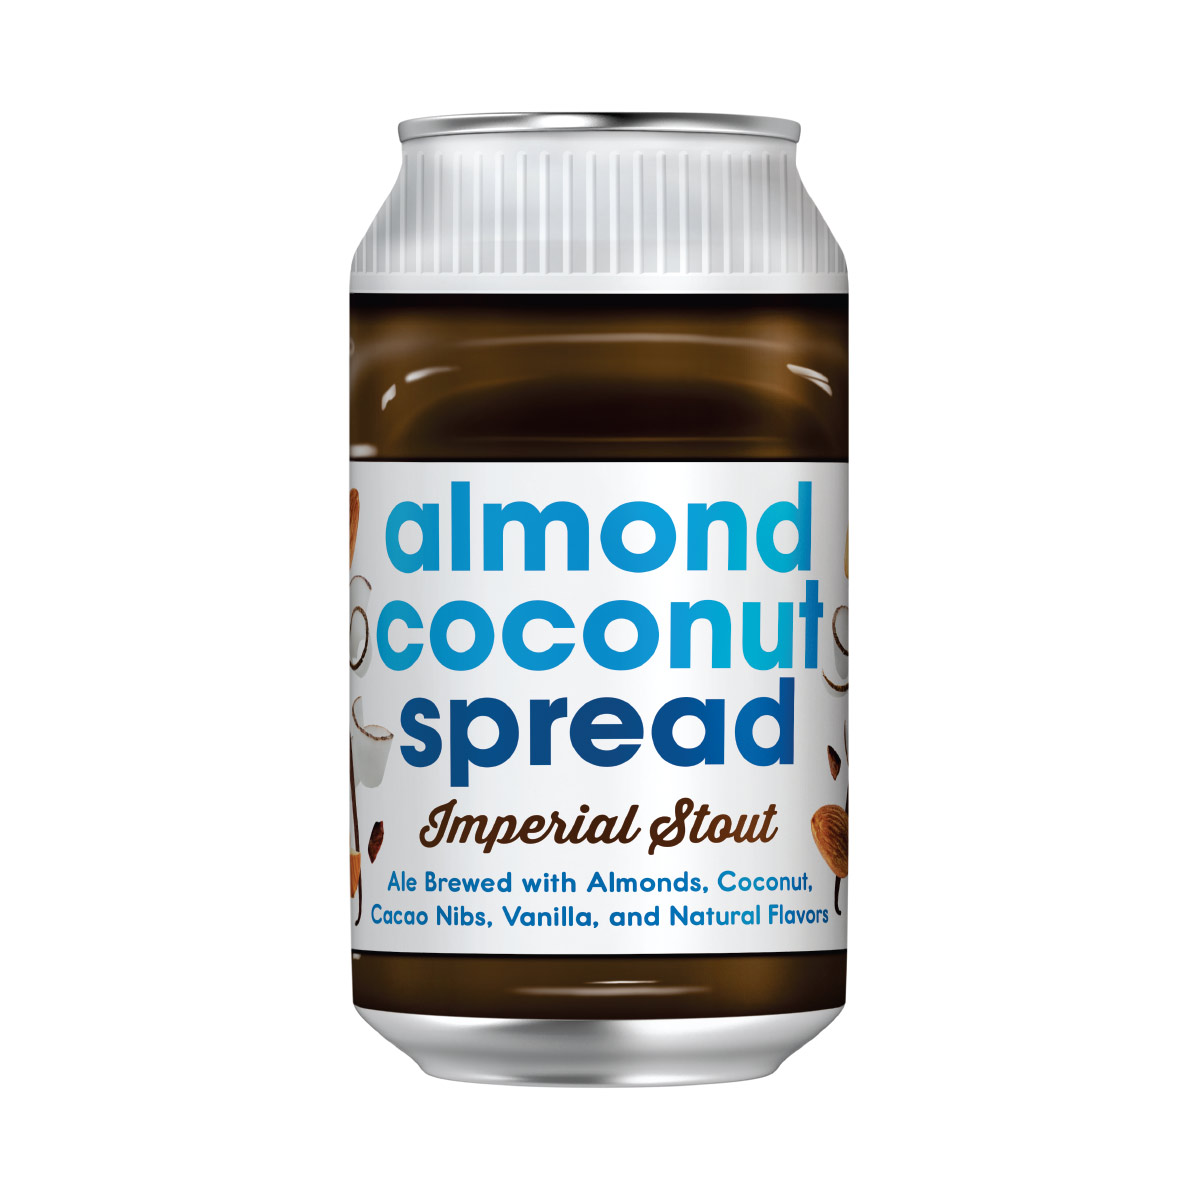 Almond Coconut Spread Imperial Stout